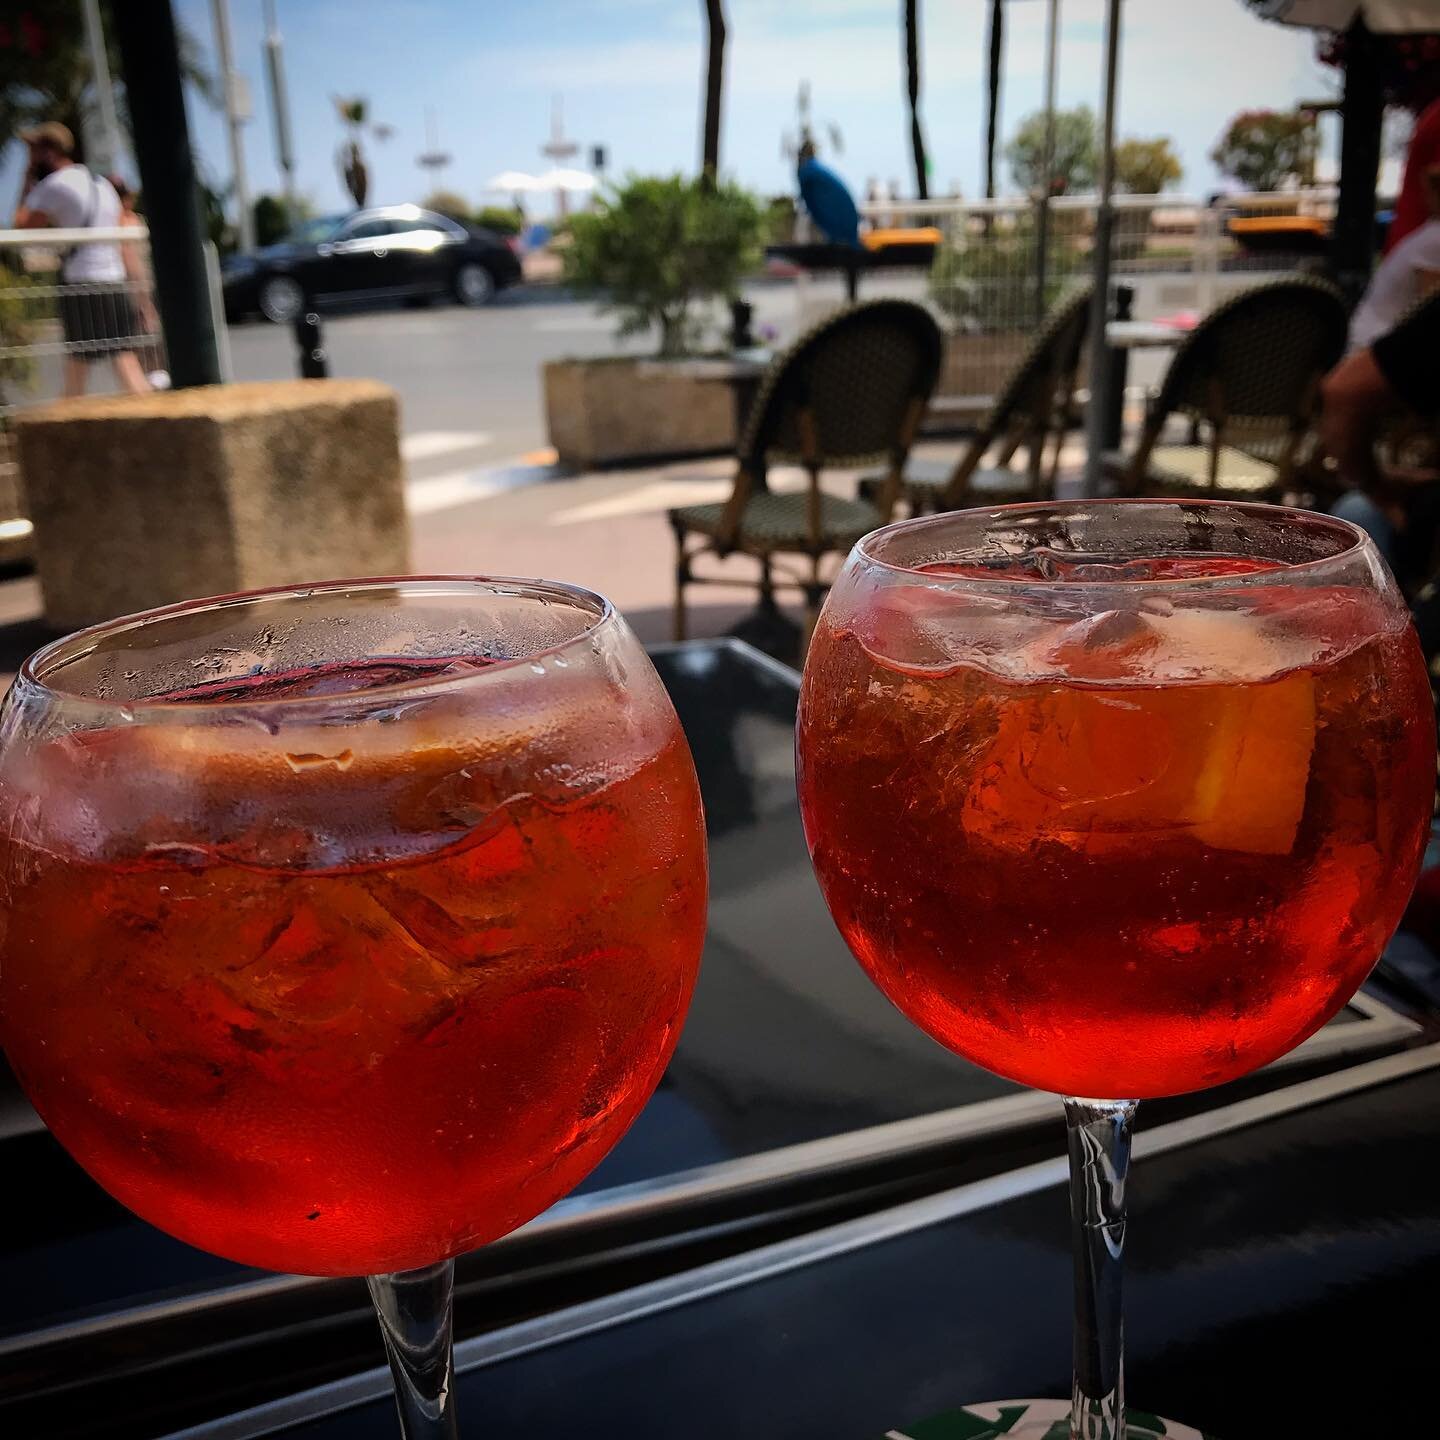 Back by popular demand, live from the south of France. Yes, we know Aperol is Italian, but this is how we like to kick things off.  #cannes #canneslions2019 #mediterranean #workcation